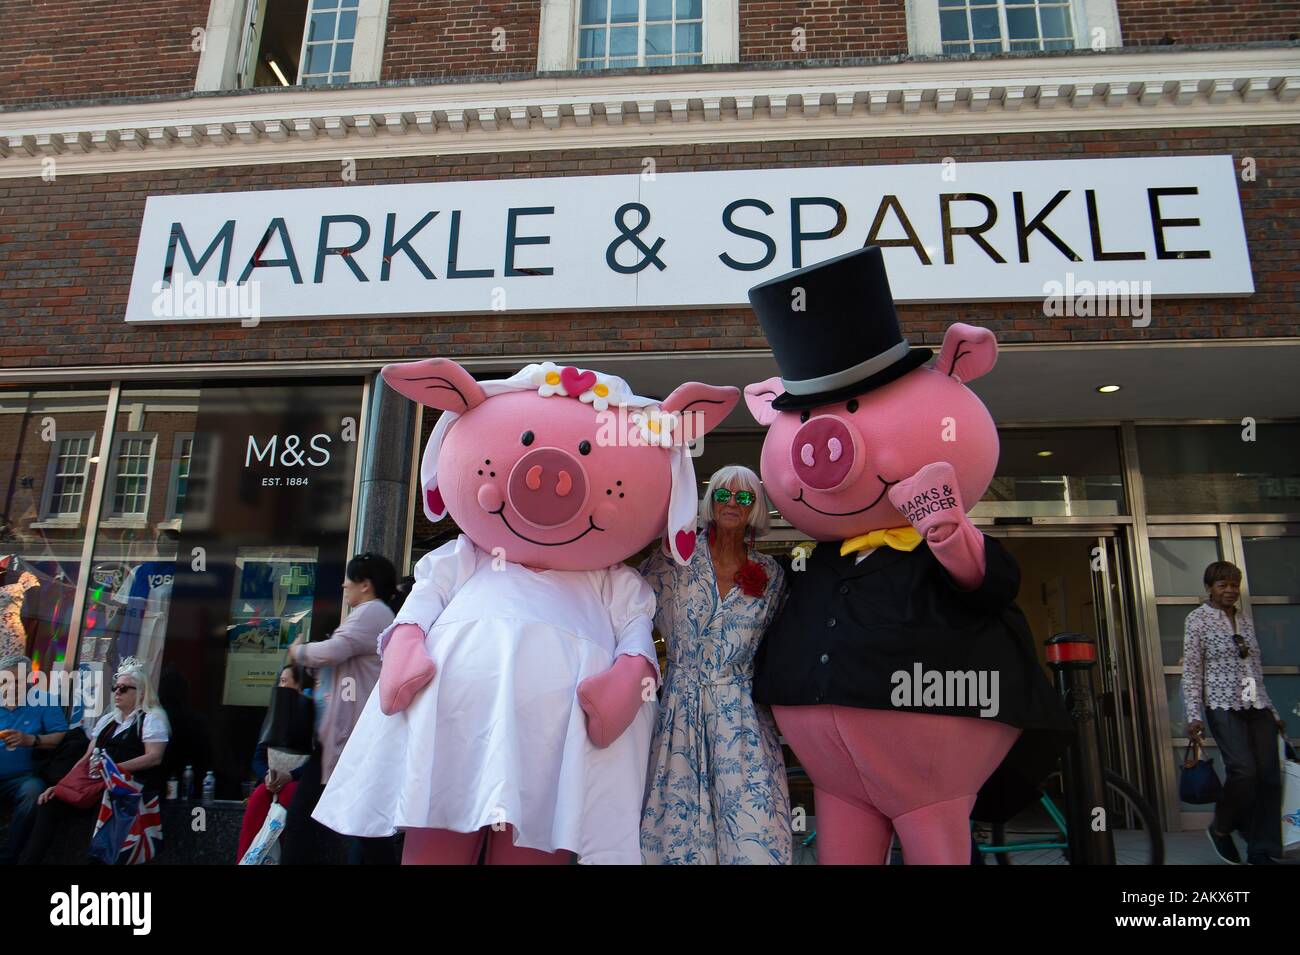 Royal Wedding Day, Windsor, Berkshire, UK. 19th May, 2018.  Marks & Spencer in Peascod Street put up a special Markle & Sparkle sign on the outside of their shop and had Percy Pig characters delighting the crowds on the day of the Royal Wedding of Prince Harry and Meghan Markle. Credit: Maureen McLean/Alamy Stock Photo